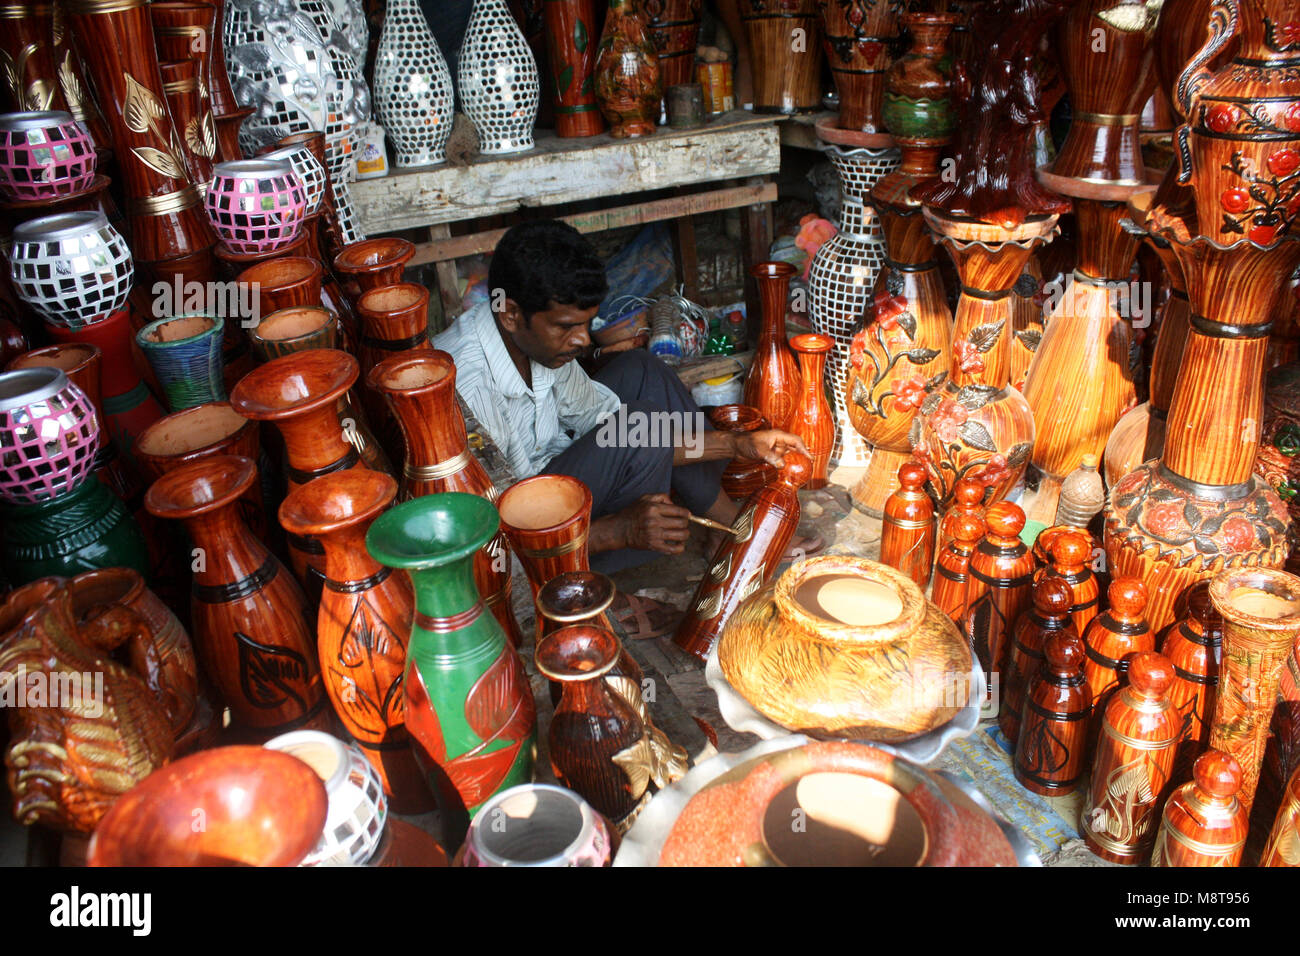 A shopkeeper paints the mud pot in his shop in Mud pots (Handicraft) market in Dhaka, Bangladesh.Different type of Mud pots (Handicraft) market in Dha Stock Photo